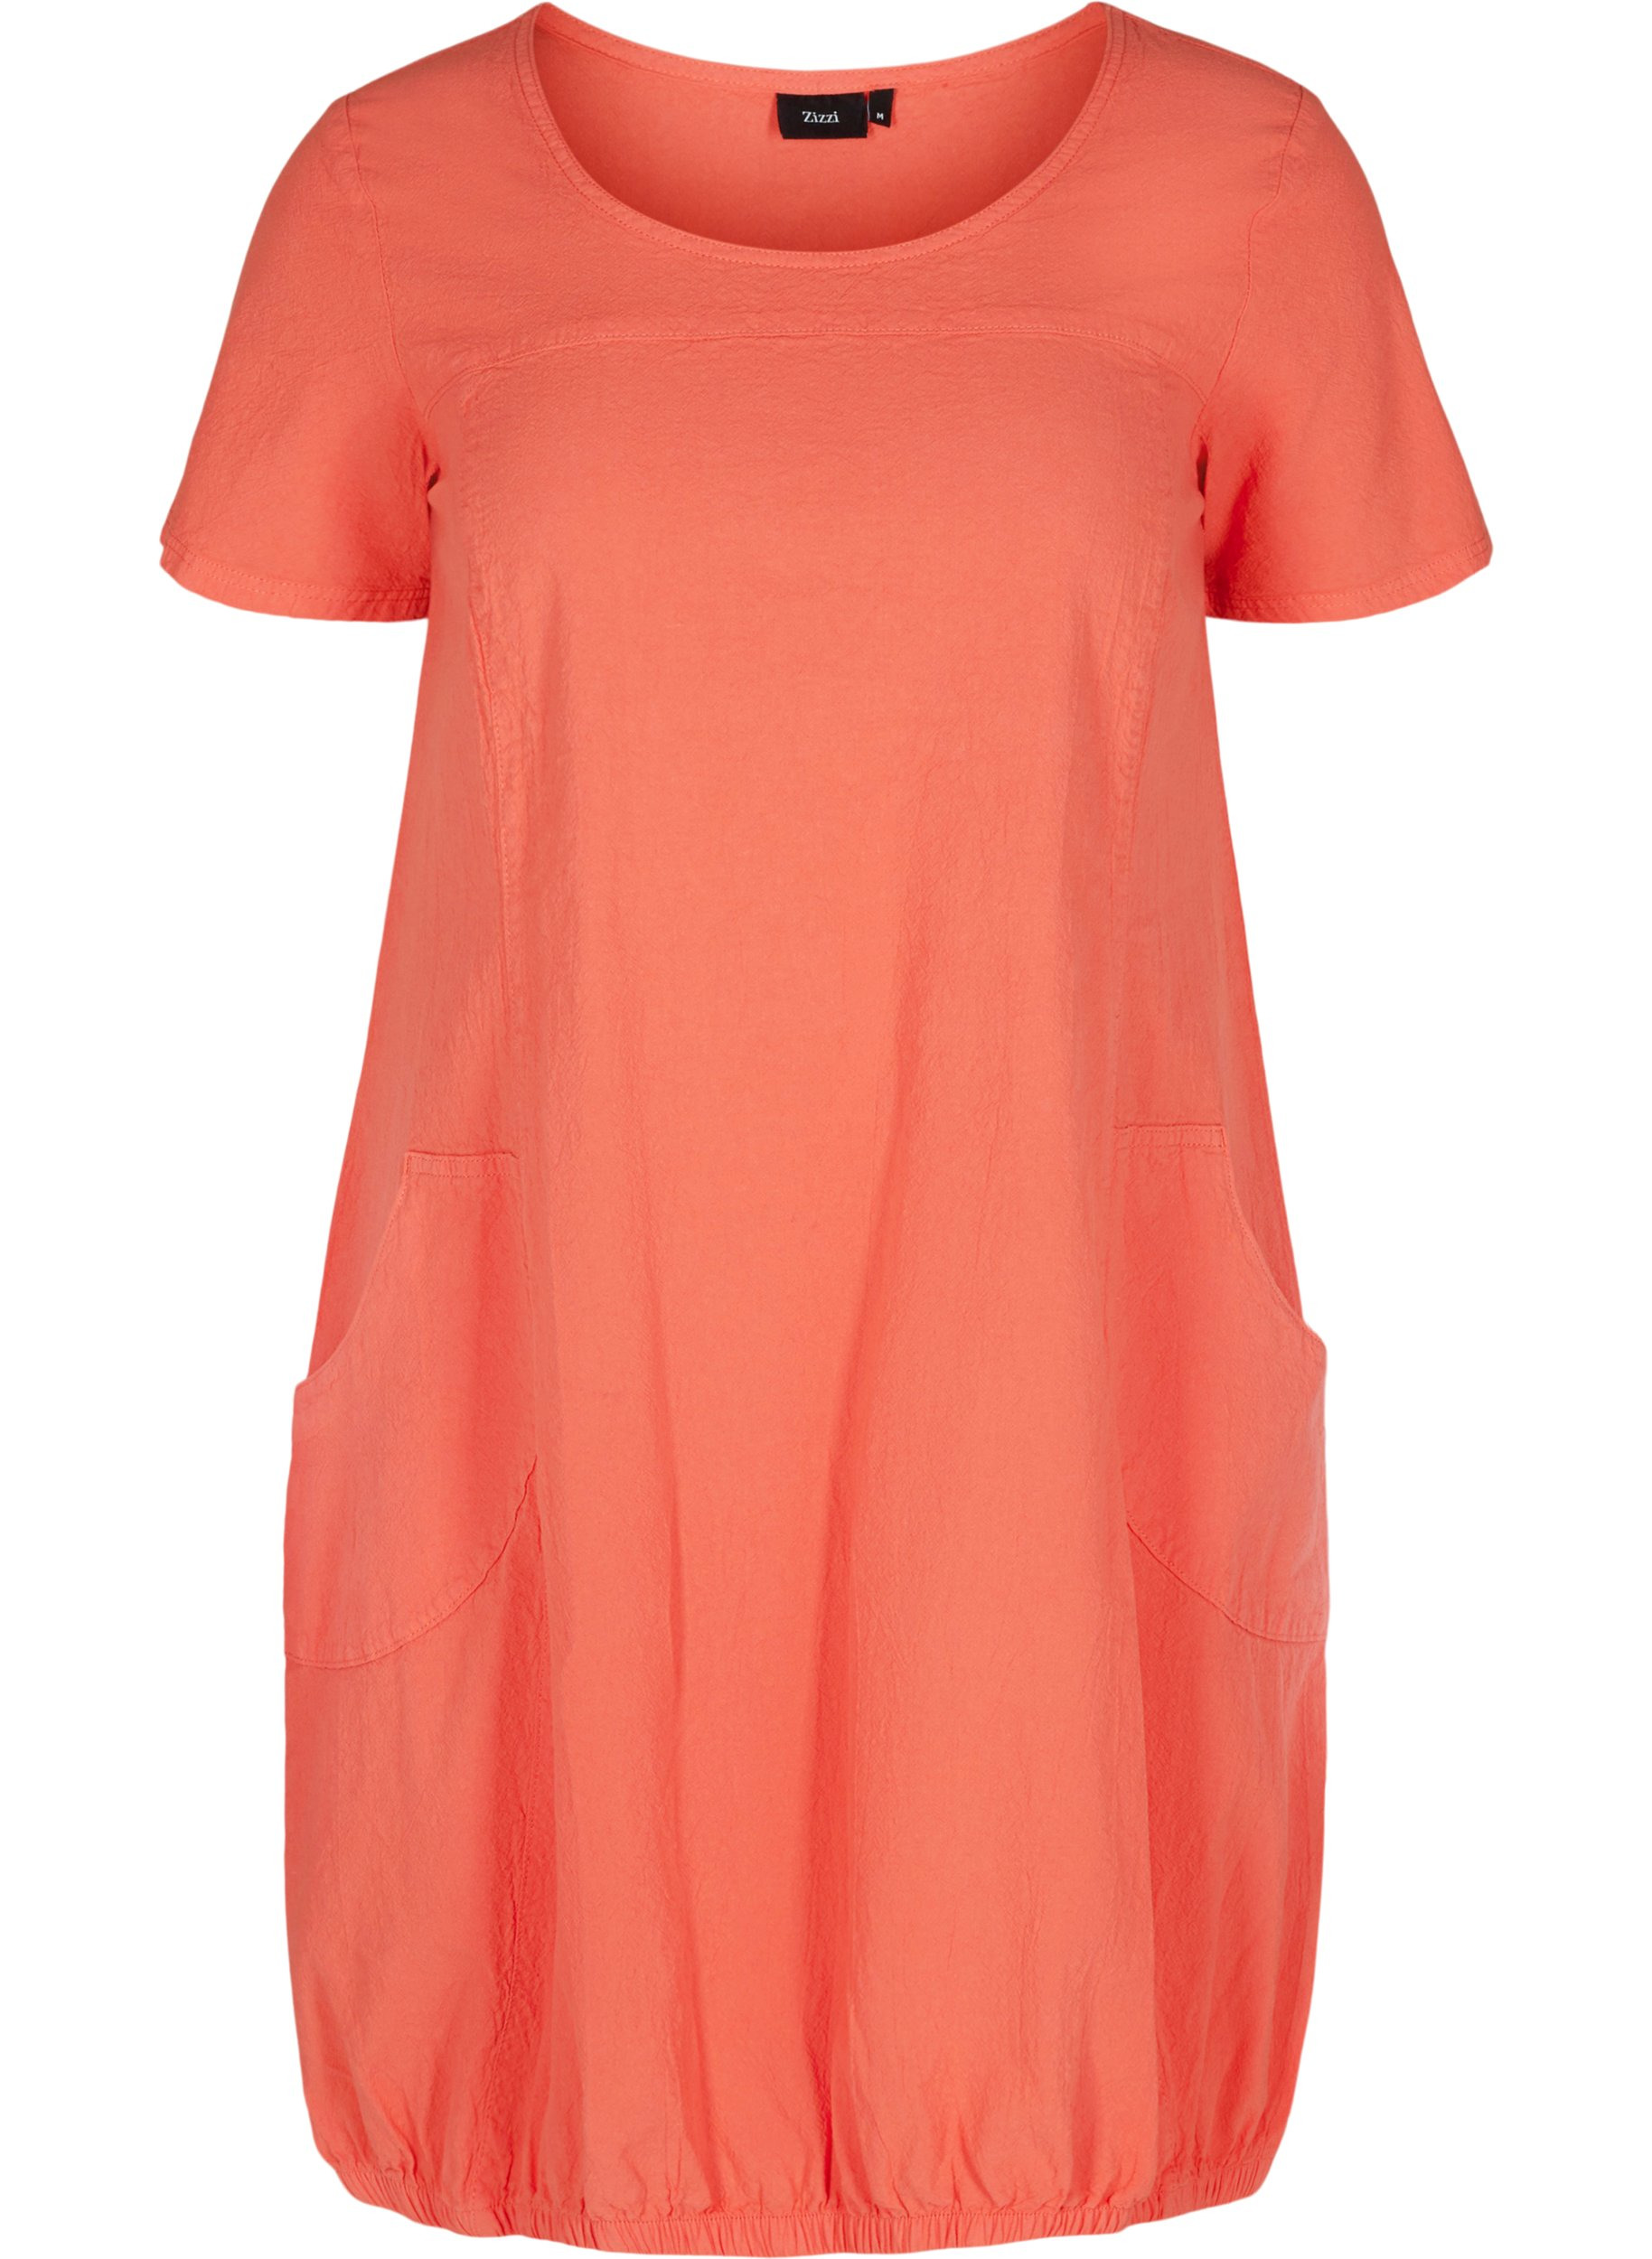 Short-sleeved cotton dress, Hot Coral